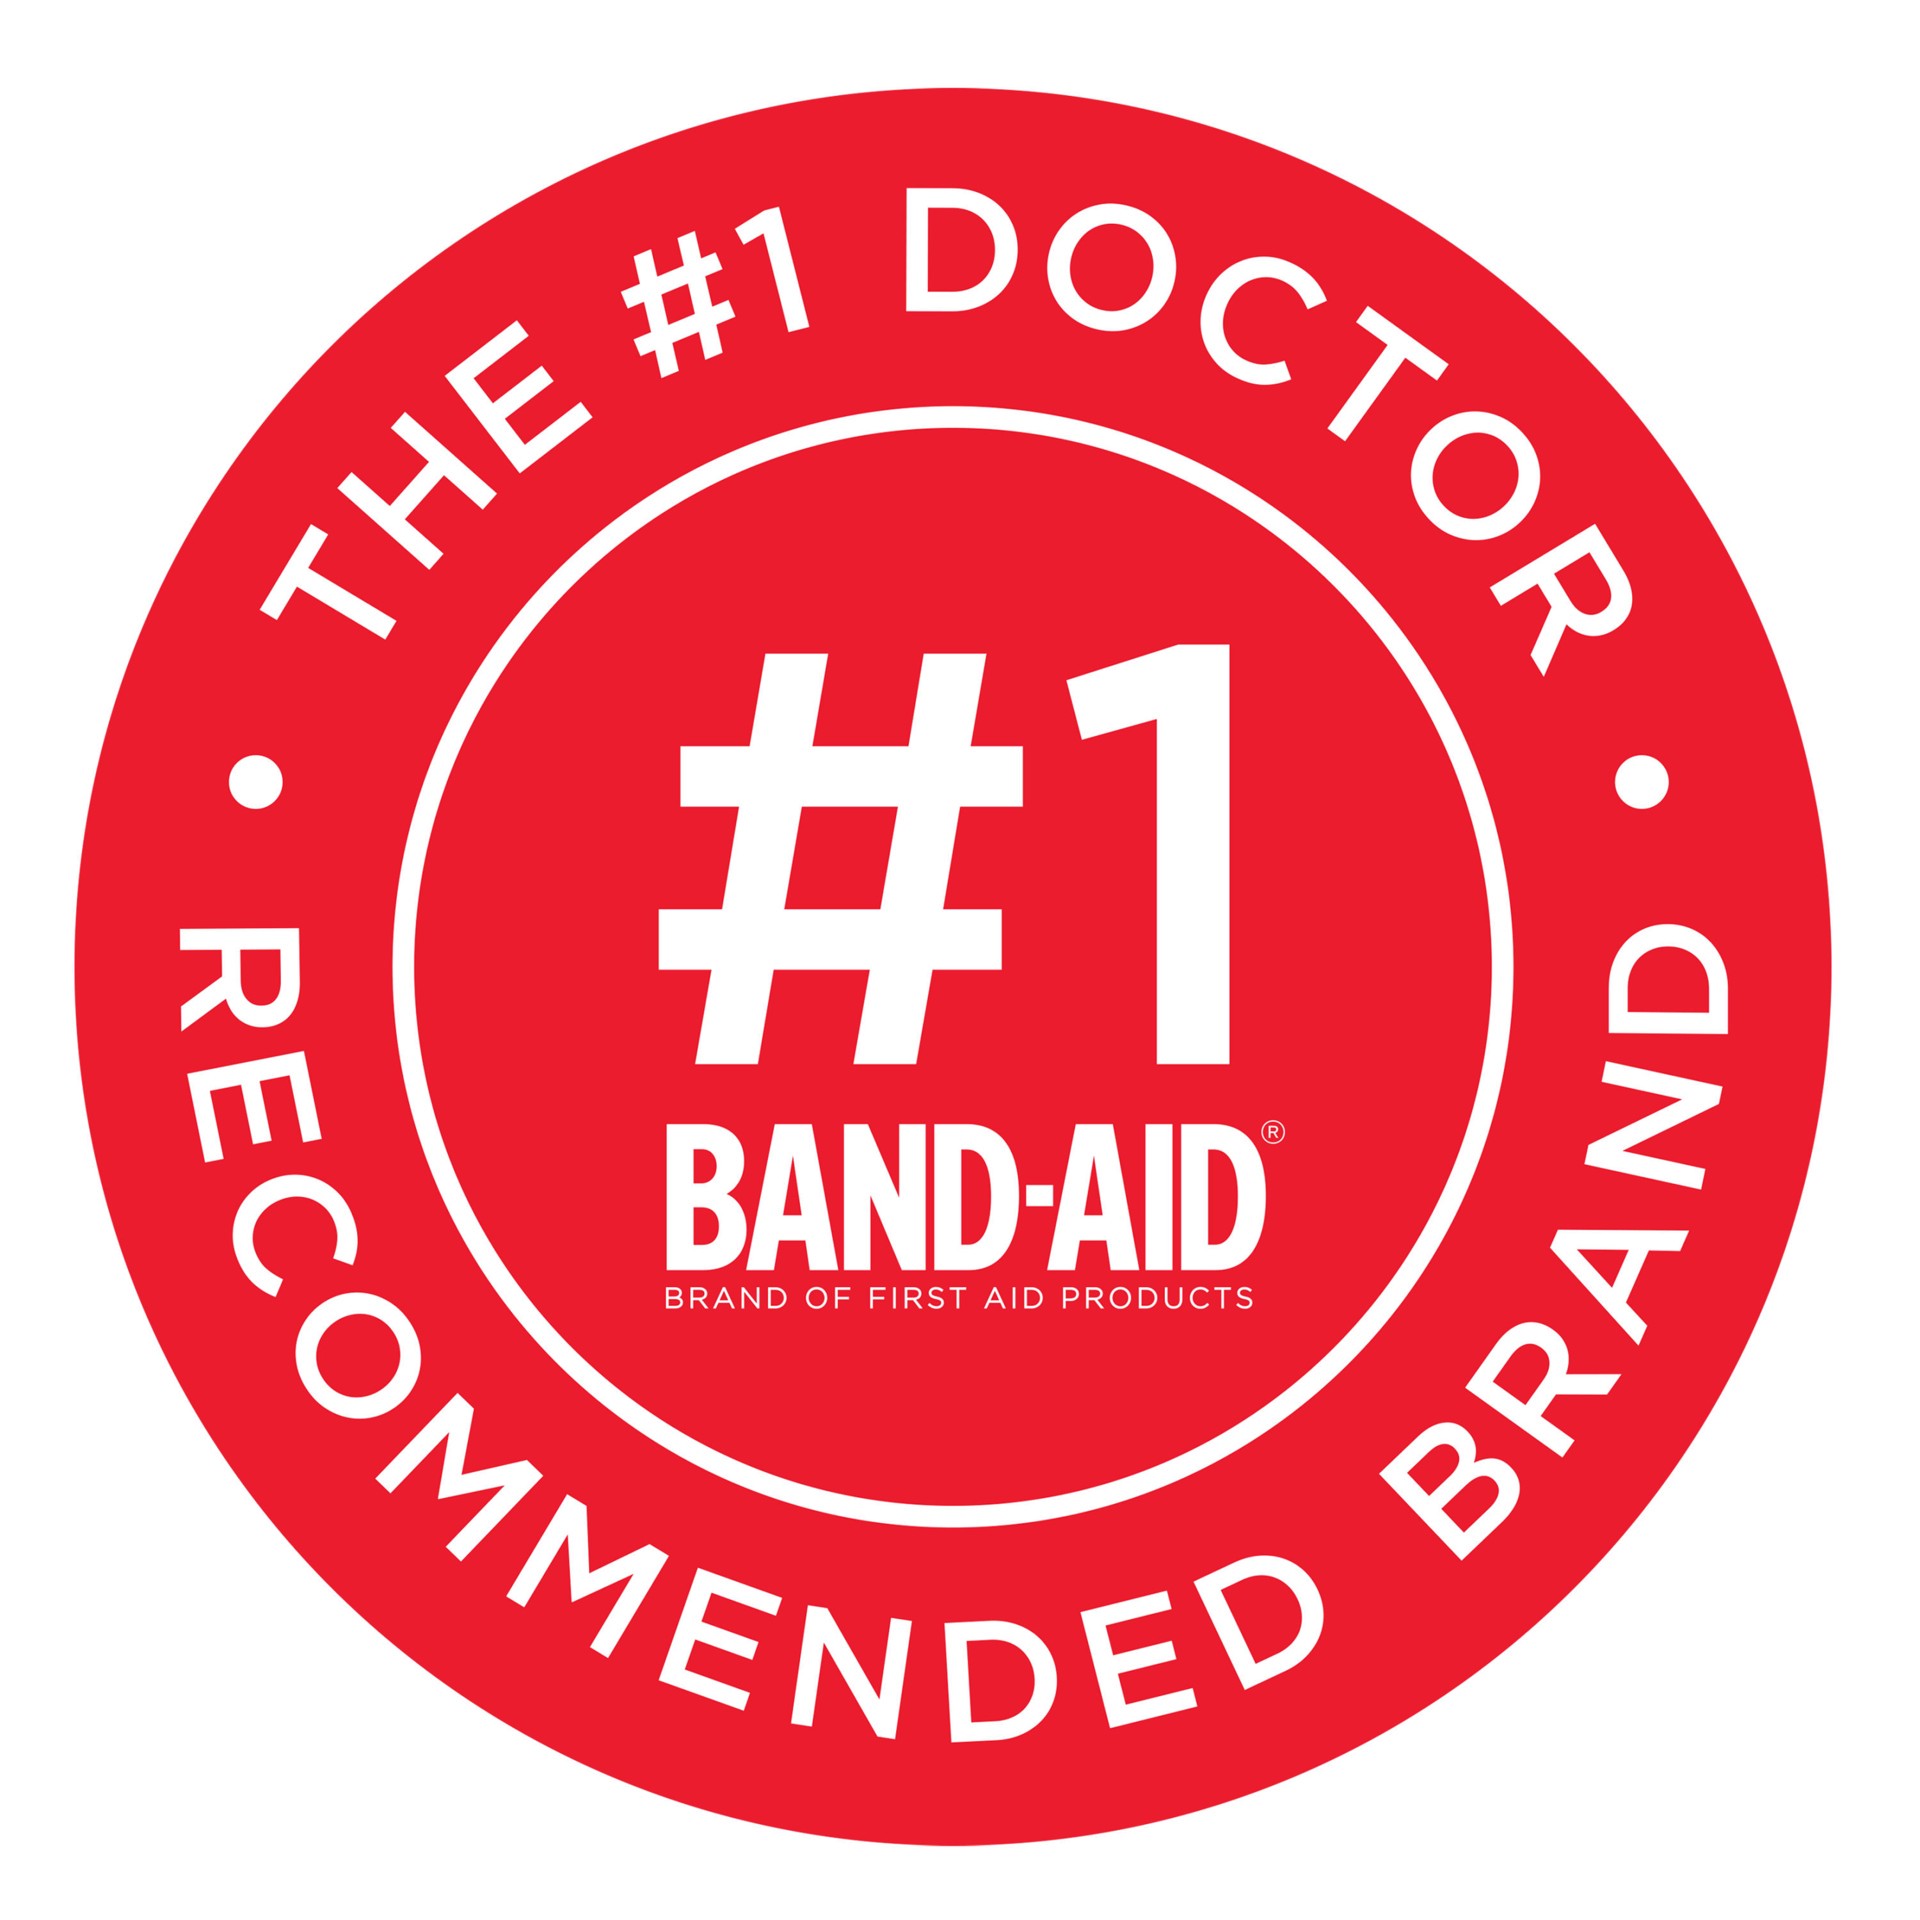 slide 3 of 5, BAND-AID Band Aid Brand of First Aid Products Flexible Rolled Gauze Dressing for Minor Wound Care, soft Padding and Instant Absorption, 3 Inches by 2.5 Yards, 1 ct